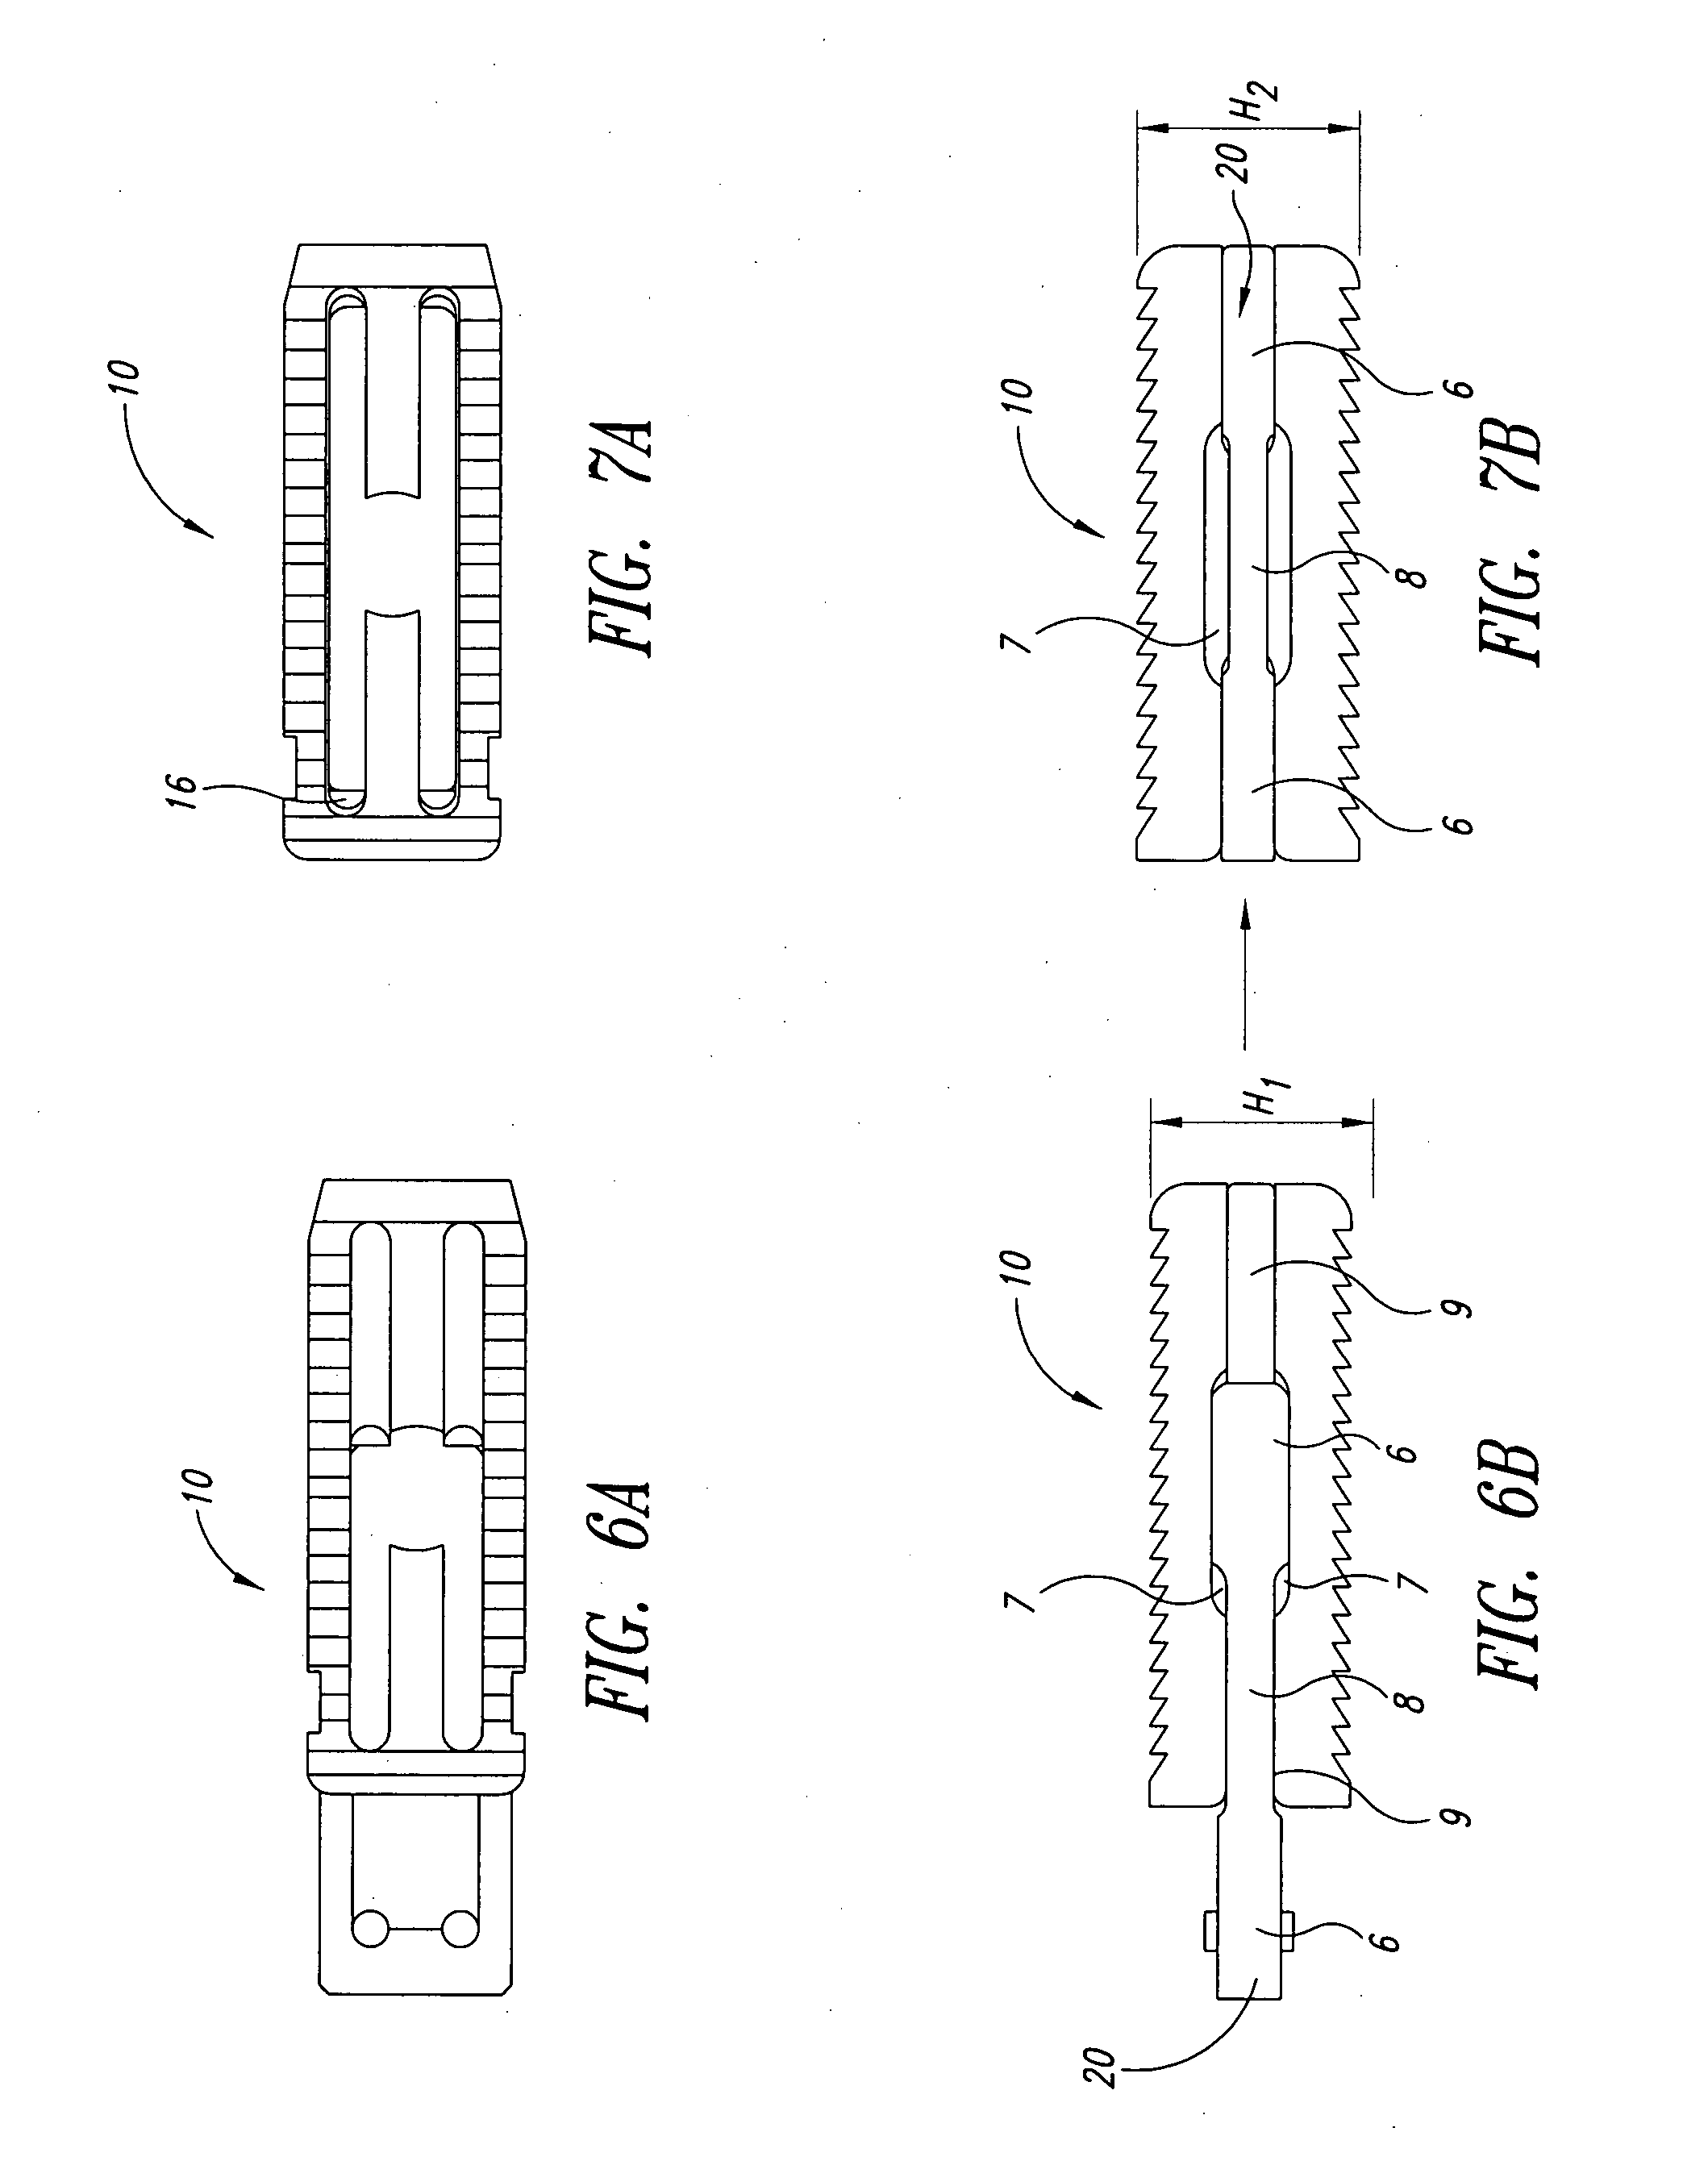 Expandable intervertebral spacer method and apparatus